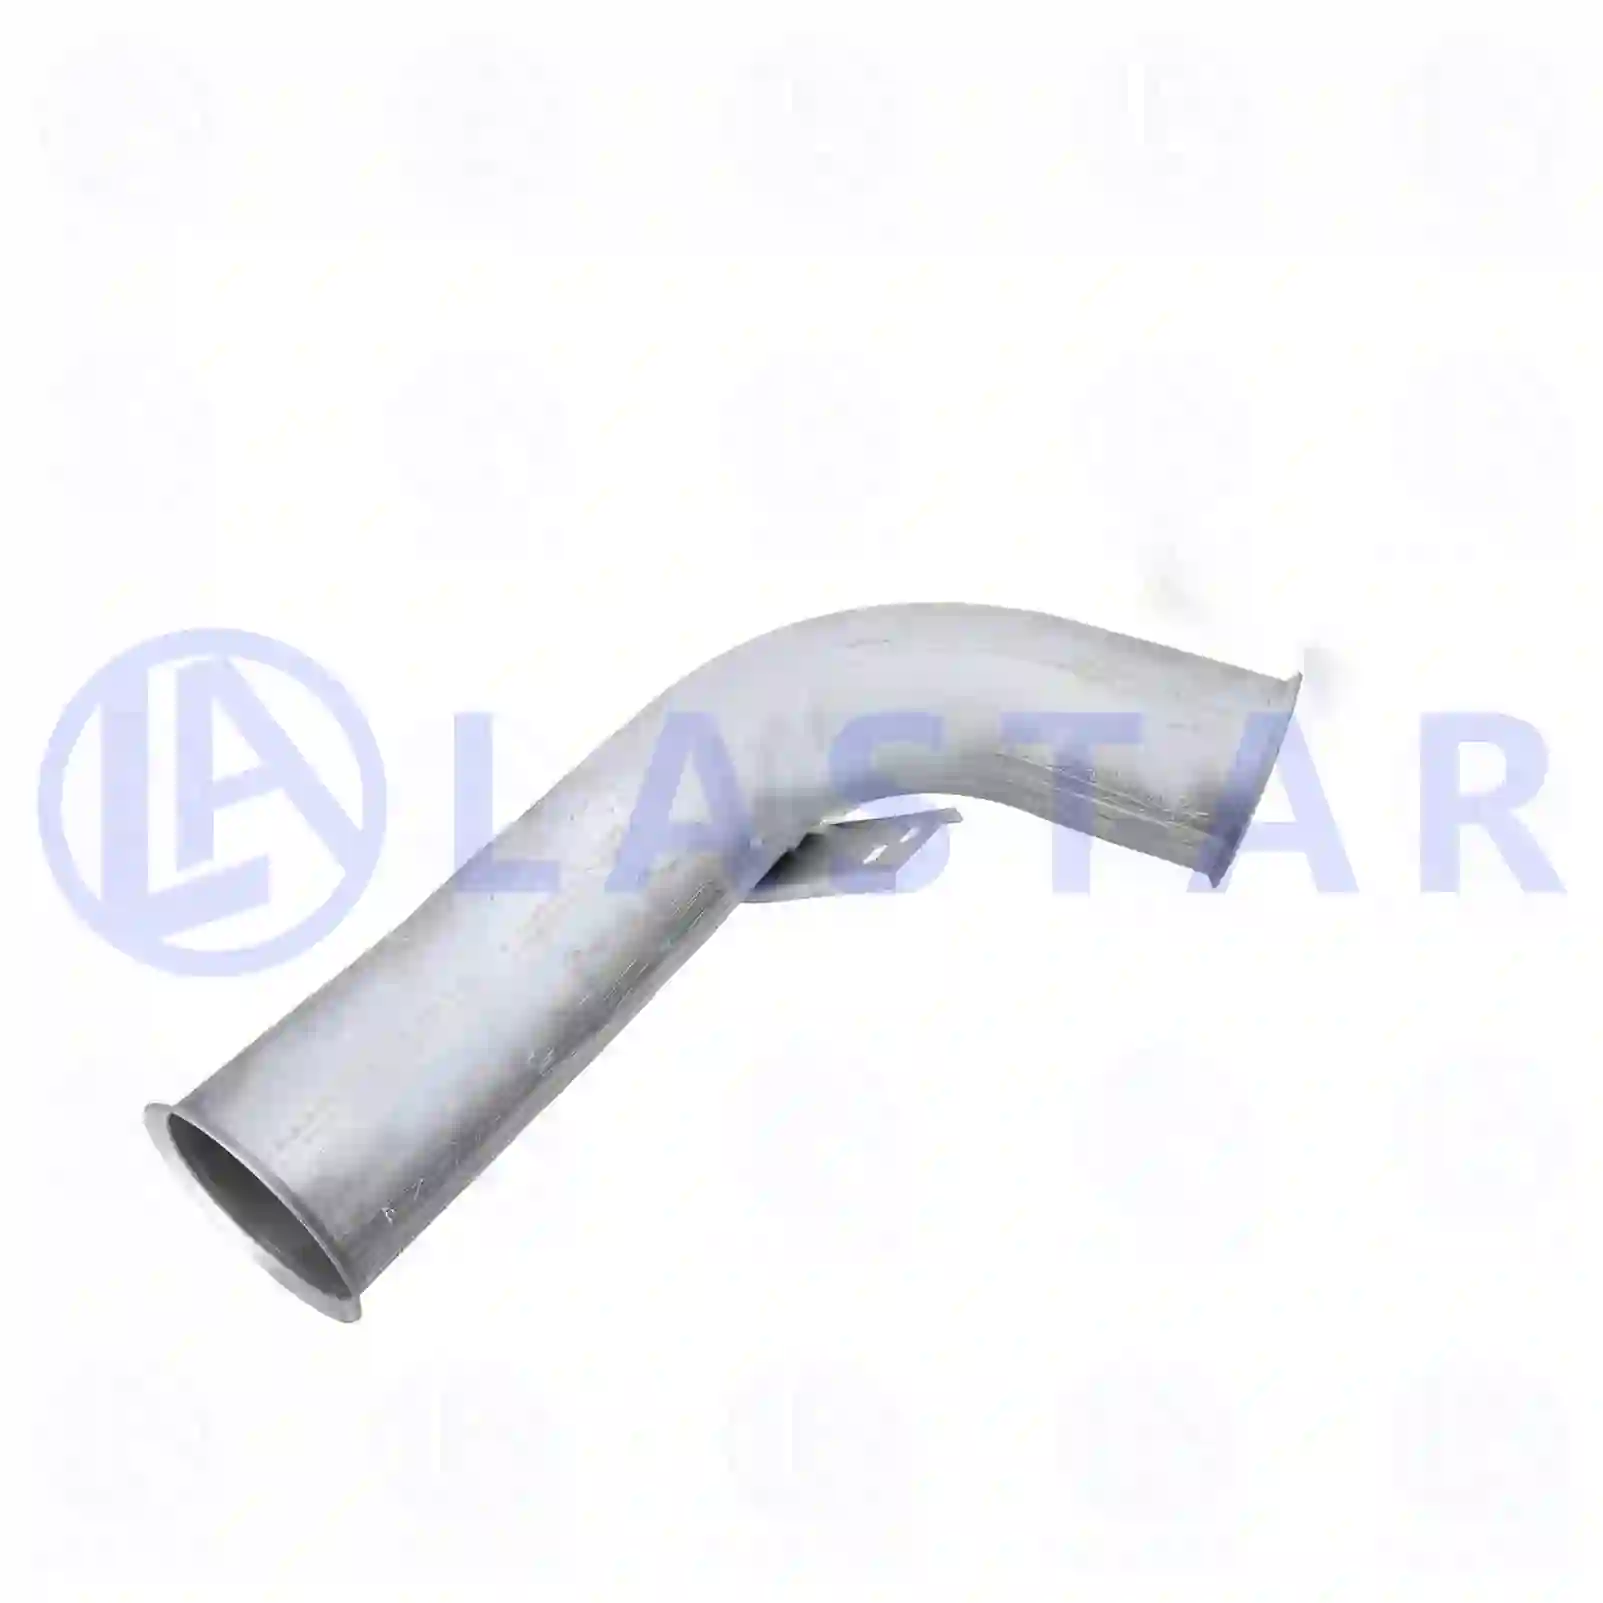 Front exhaust pipe, 77706980, 1364288 ||  77706980 Lastar Spare Part | Truck Spare Parts, Auotomotive Spare Parts Front exhaust pipe, 77706980, 1364288 ||  77706980 Lastar Spare Part | Truck Spare Parts, Auotomotive Spare Parts